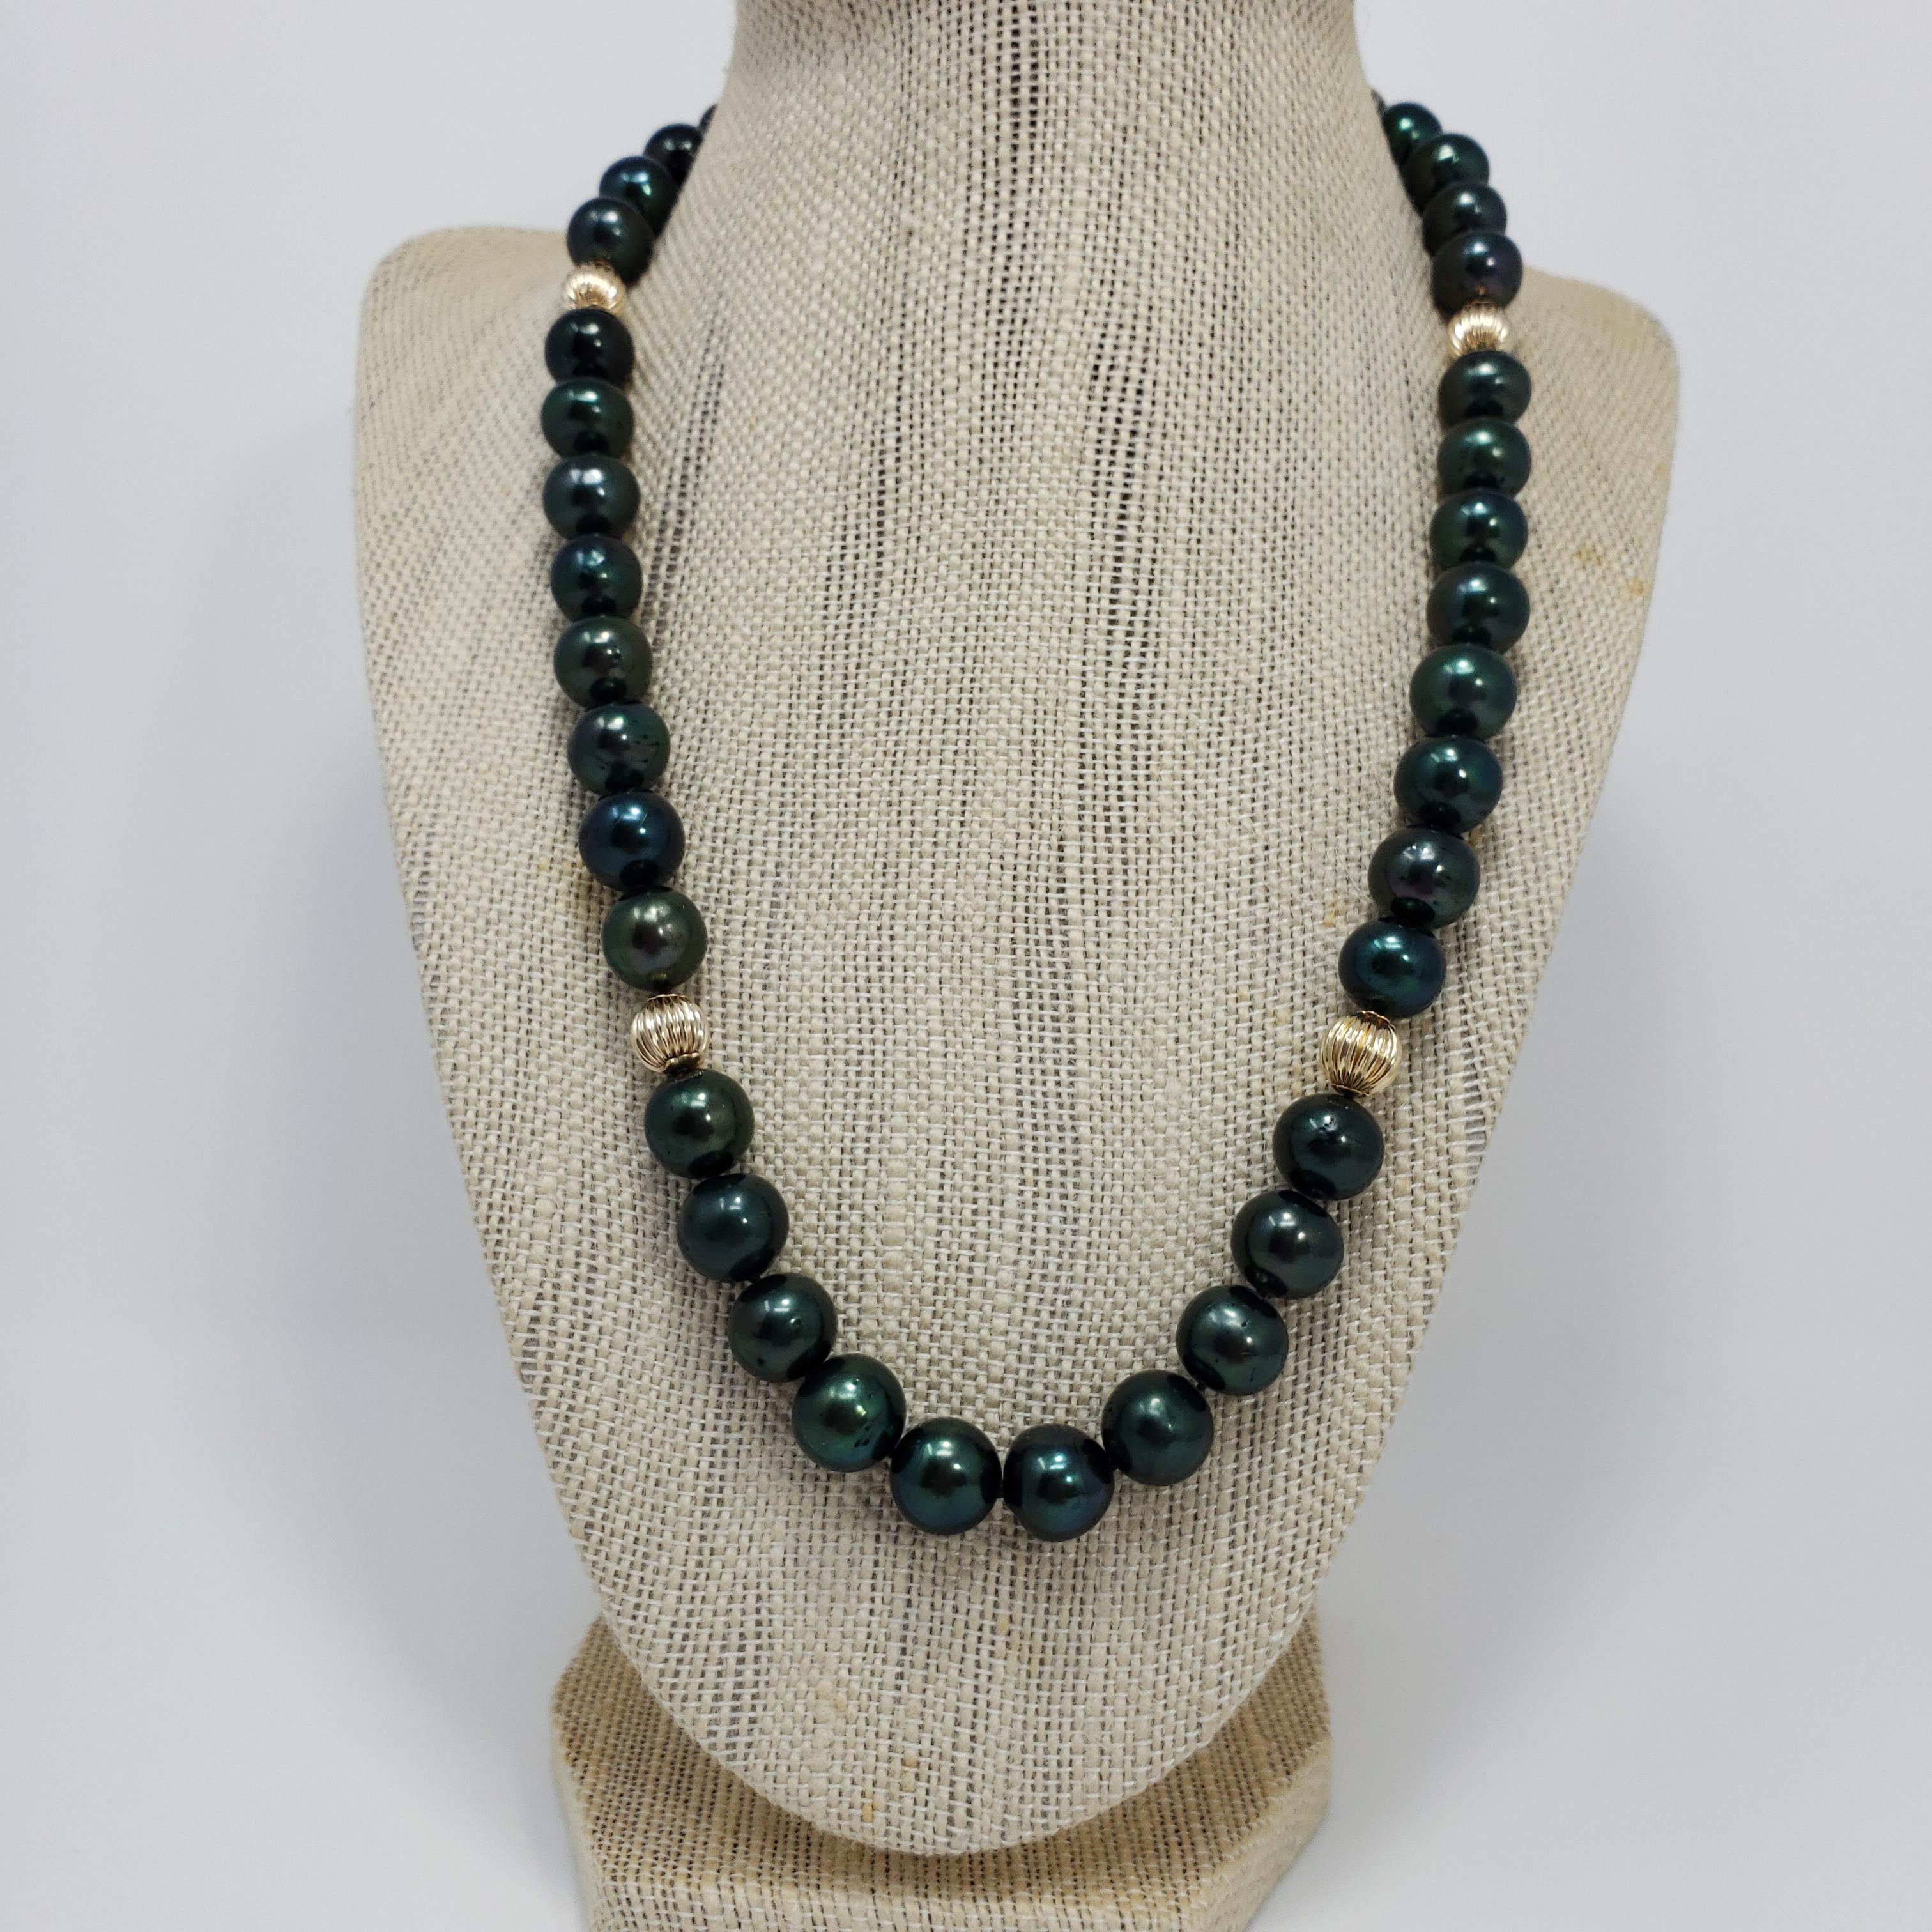 A sophisticated Tahitian pearl necklace. This strand of tahitian pearls has a luxurious green tint and is decorated with 14K yellow gold accents and clasp. A perfect accessory to top off any style!

Hallmarks: 14K
Beads range from approximately